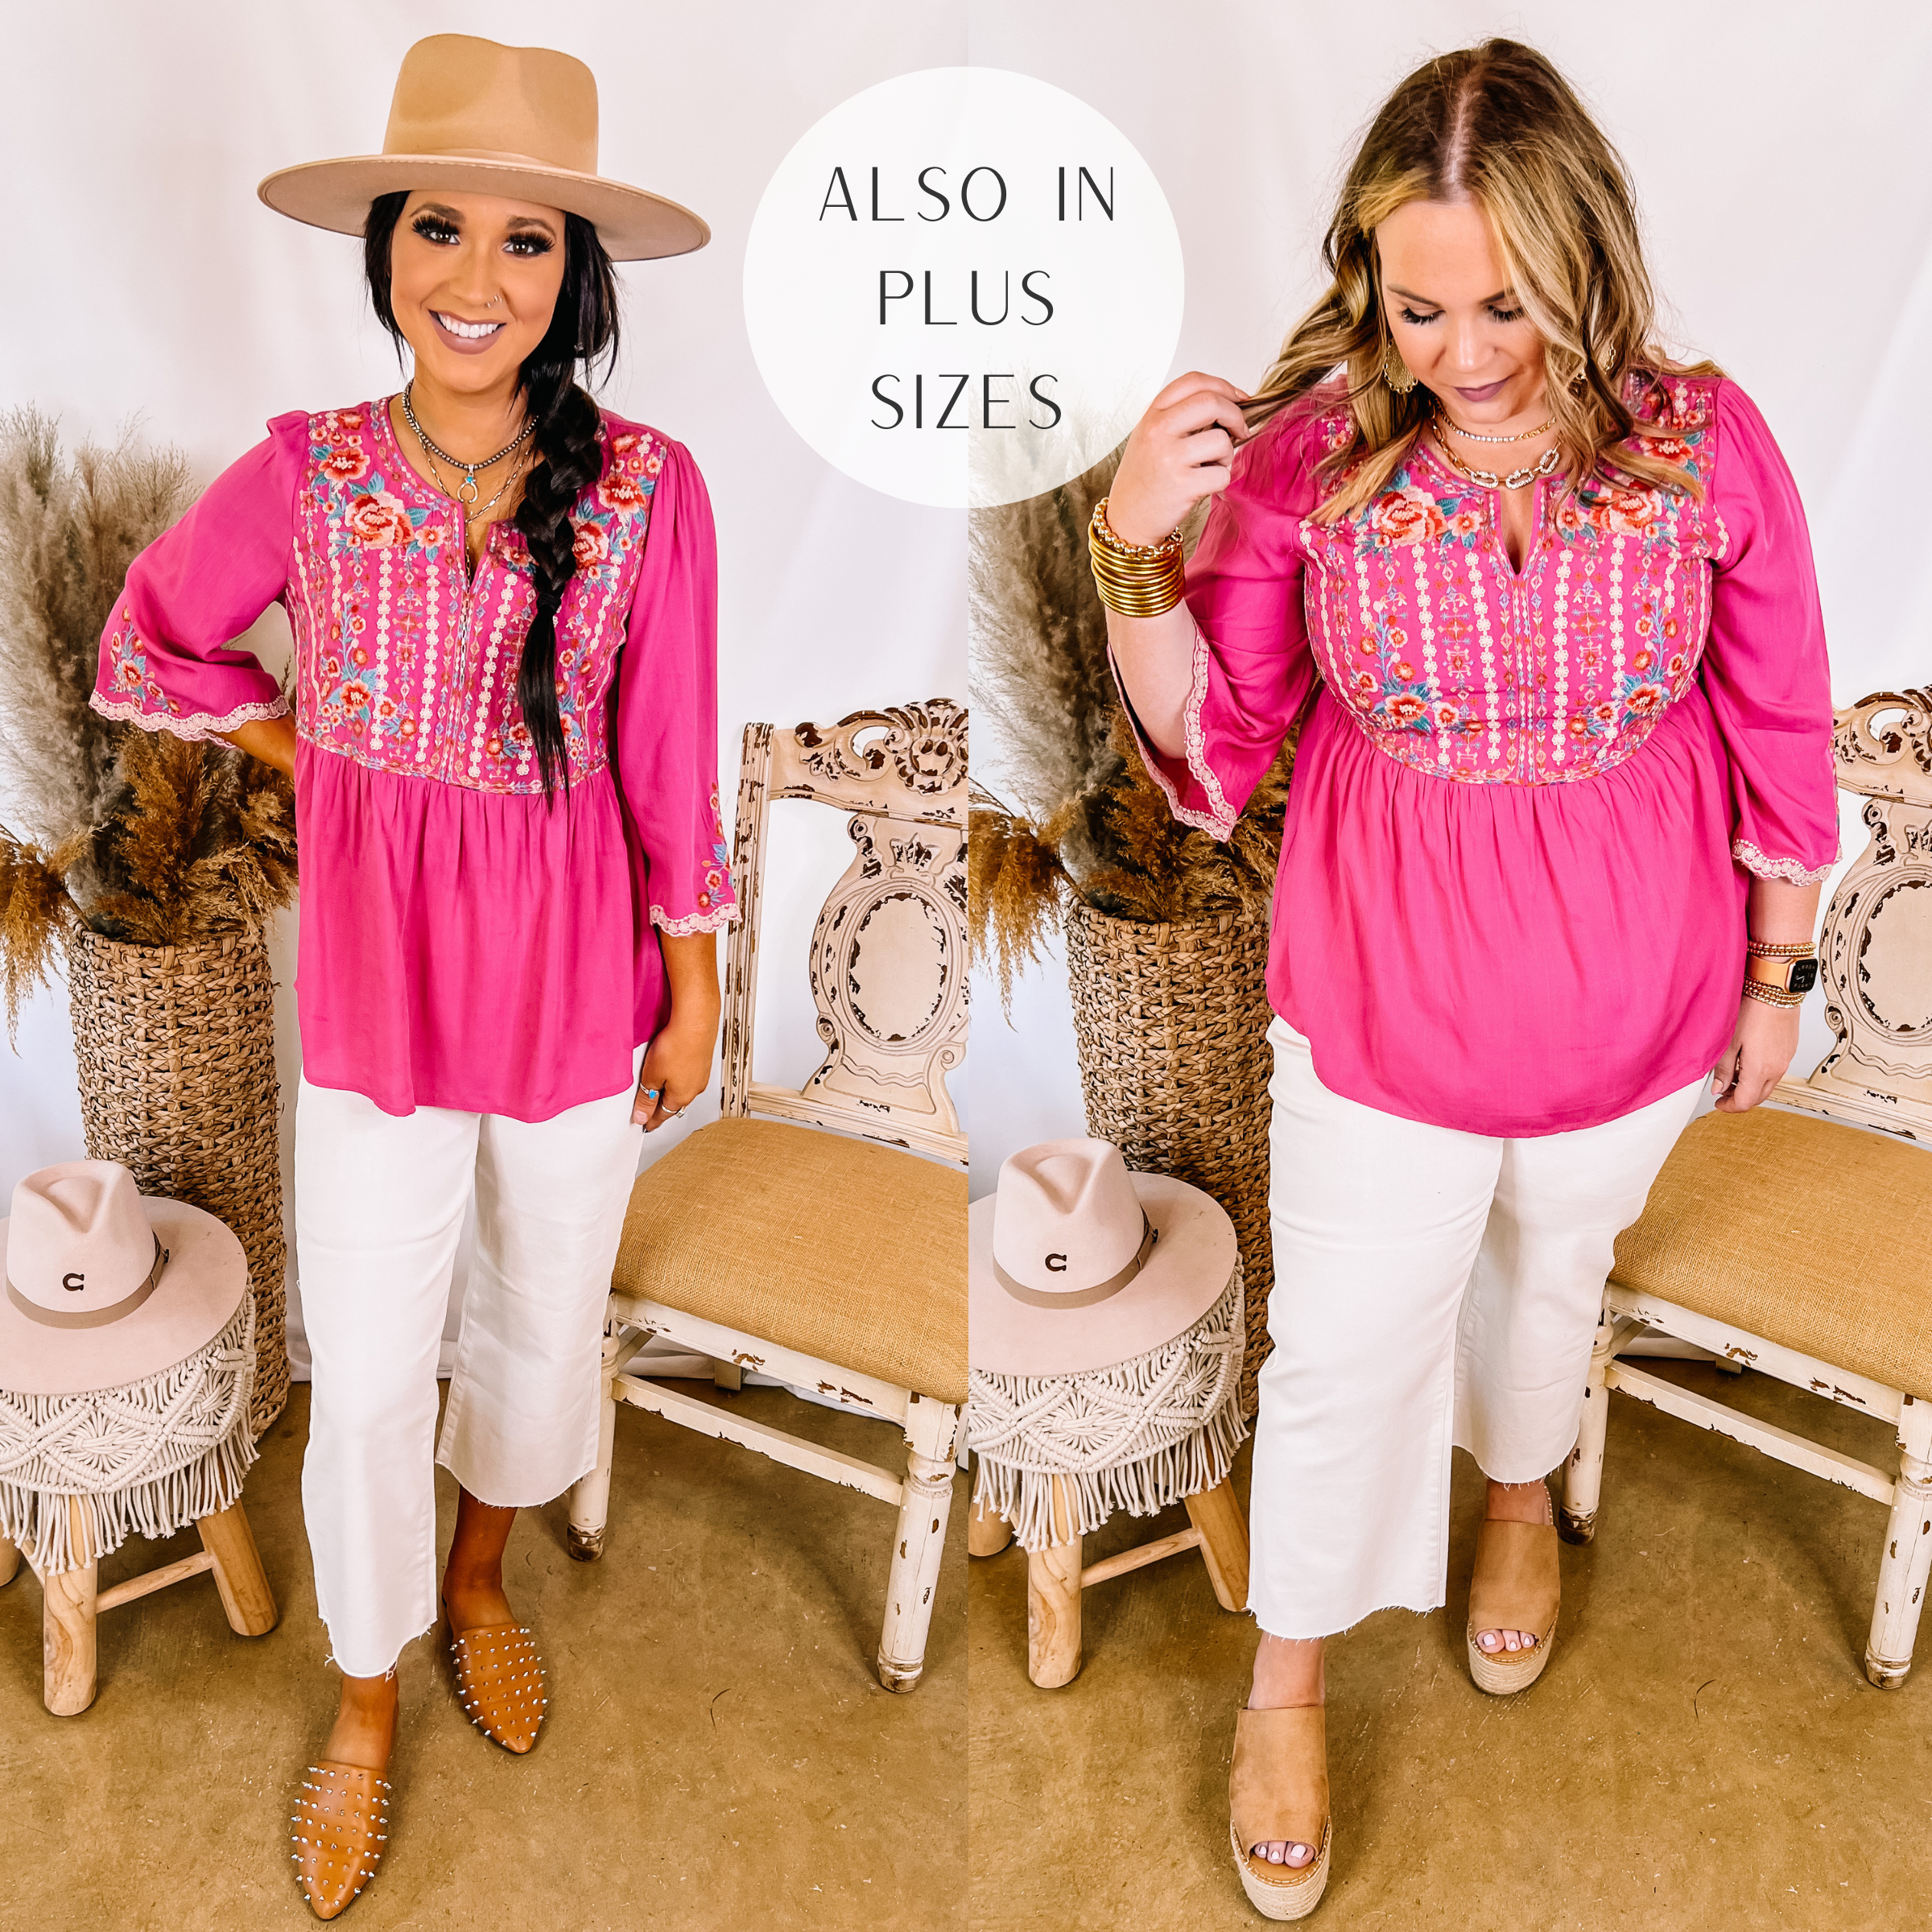 Models are wearing a 3/4 sleeve pink embroidered top. Both models have it paired with white cropped jeans. Size small model has it paired with a tan hat and tan mules. SIze large model has it paired with tan wedges and gold jewelry.